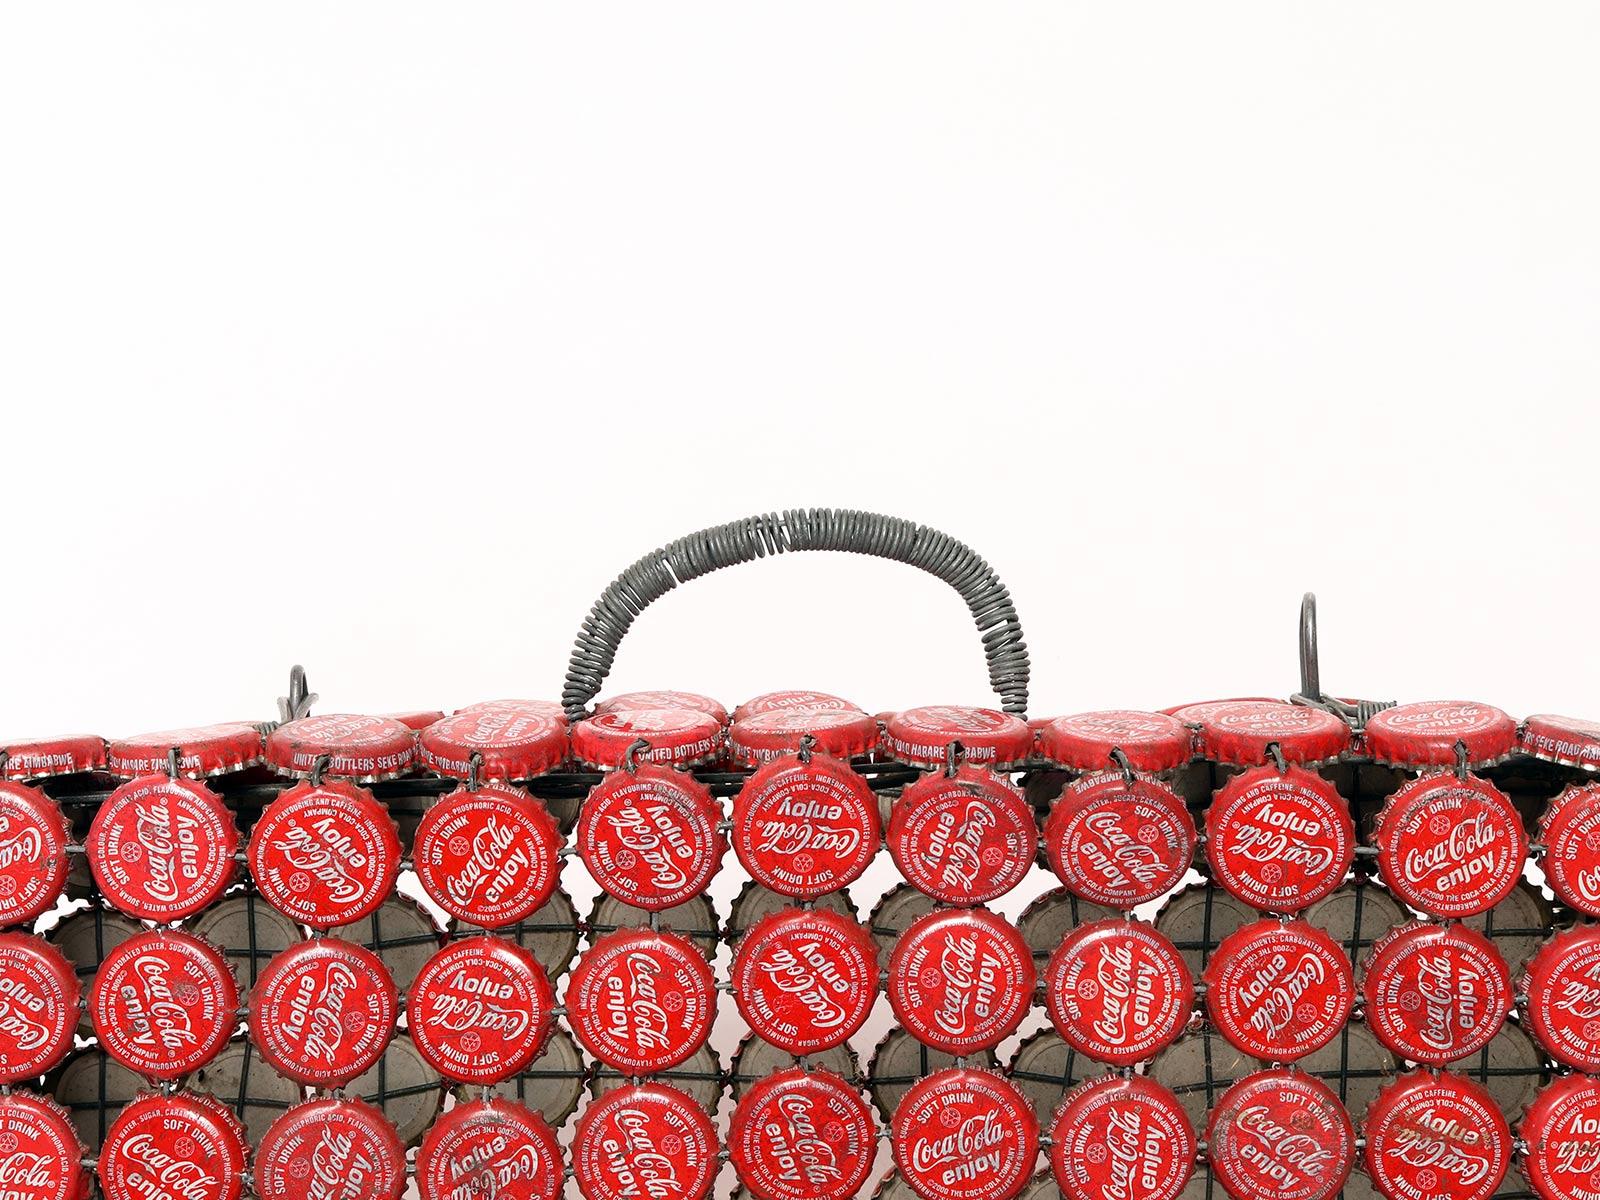 Metal Folk Art Bag, Made by Coca Cola Crown Caps, Burkina Faso, Late 80’s For Sale